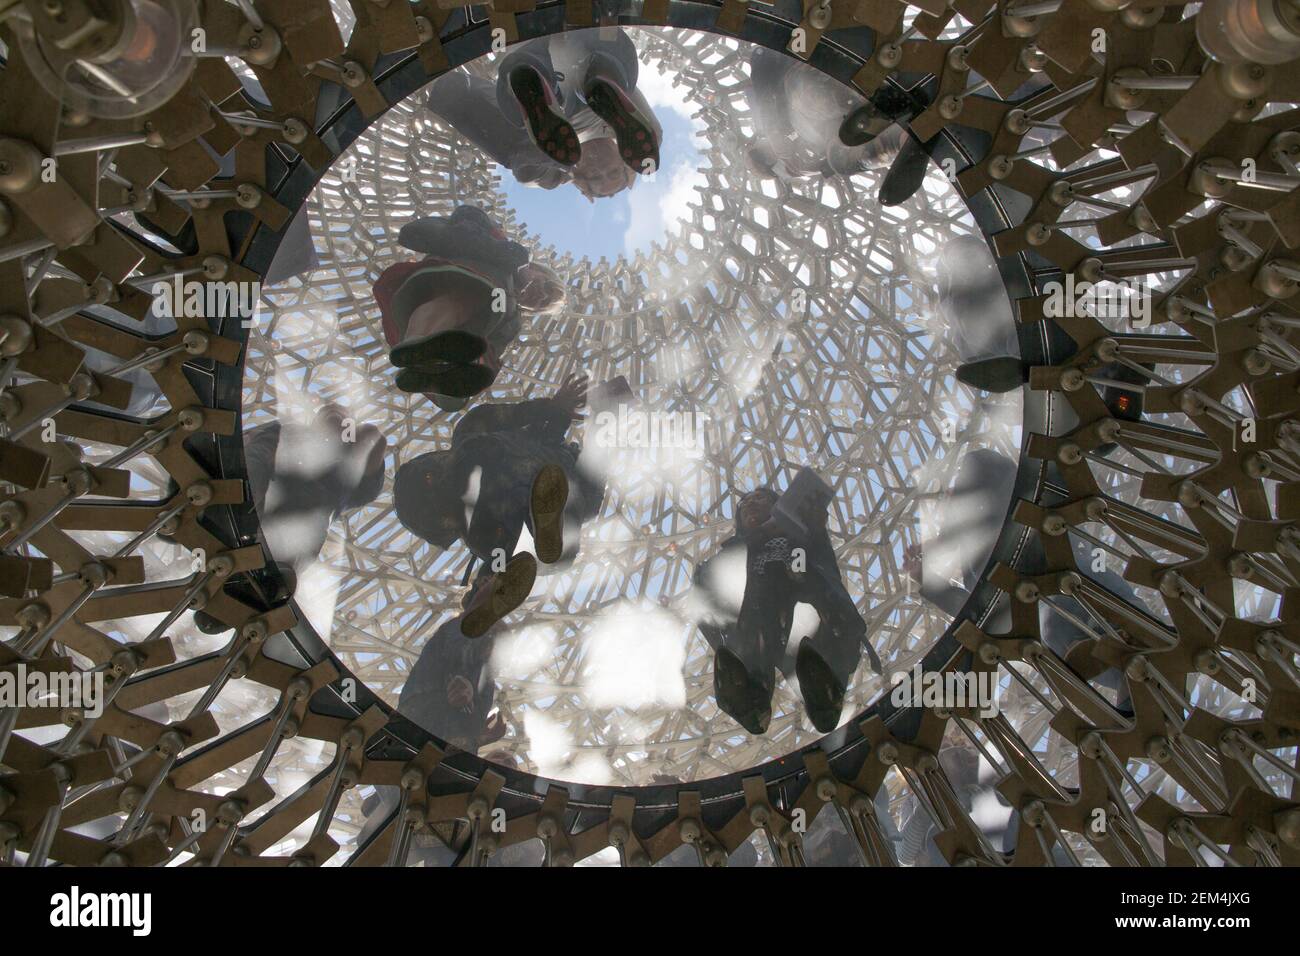 A view from underneath The Hive pavilion, which was unveiled at Kew Gardens, London, today. Designed by Wolfgang Buttress and created by BDP, the Hive Stock Photo